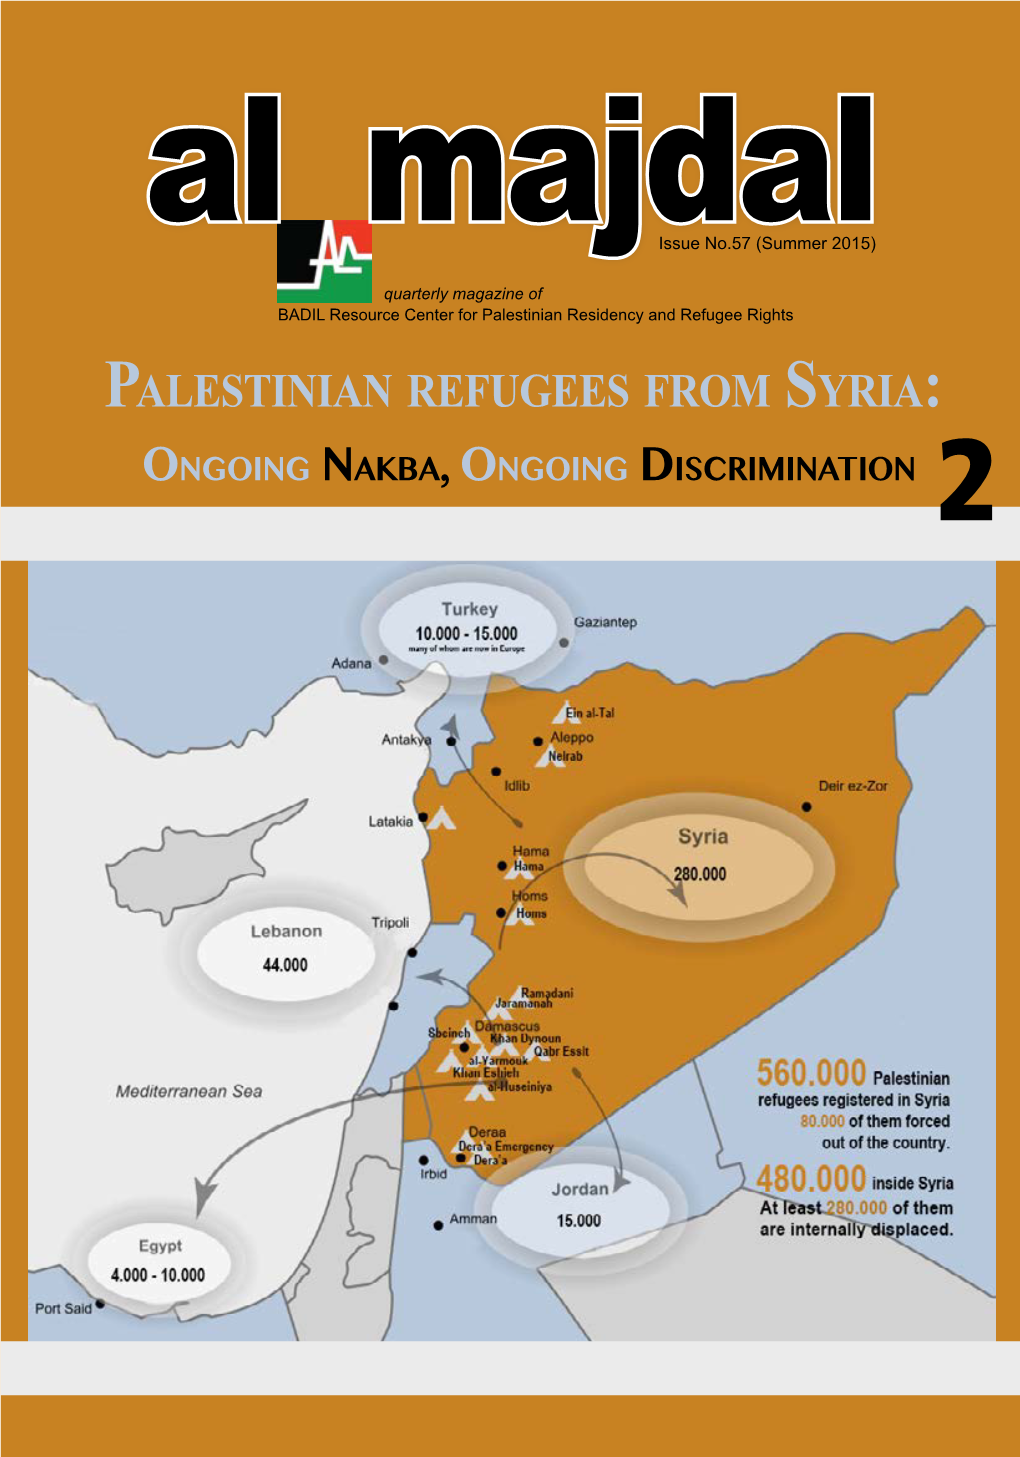 Palestinian Refugees from Syria: Ongoing Nakba, Ongoing Discrimination 2 the Scale of the Conflict Forced Palestinians to Seek Refuge Outside of Syria